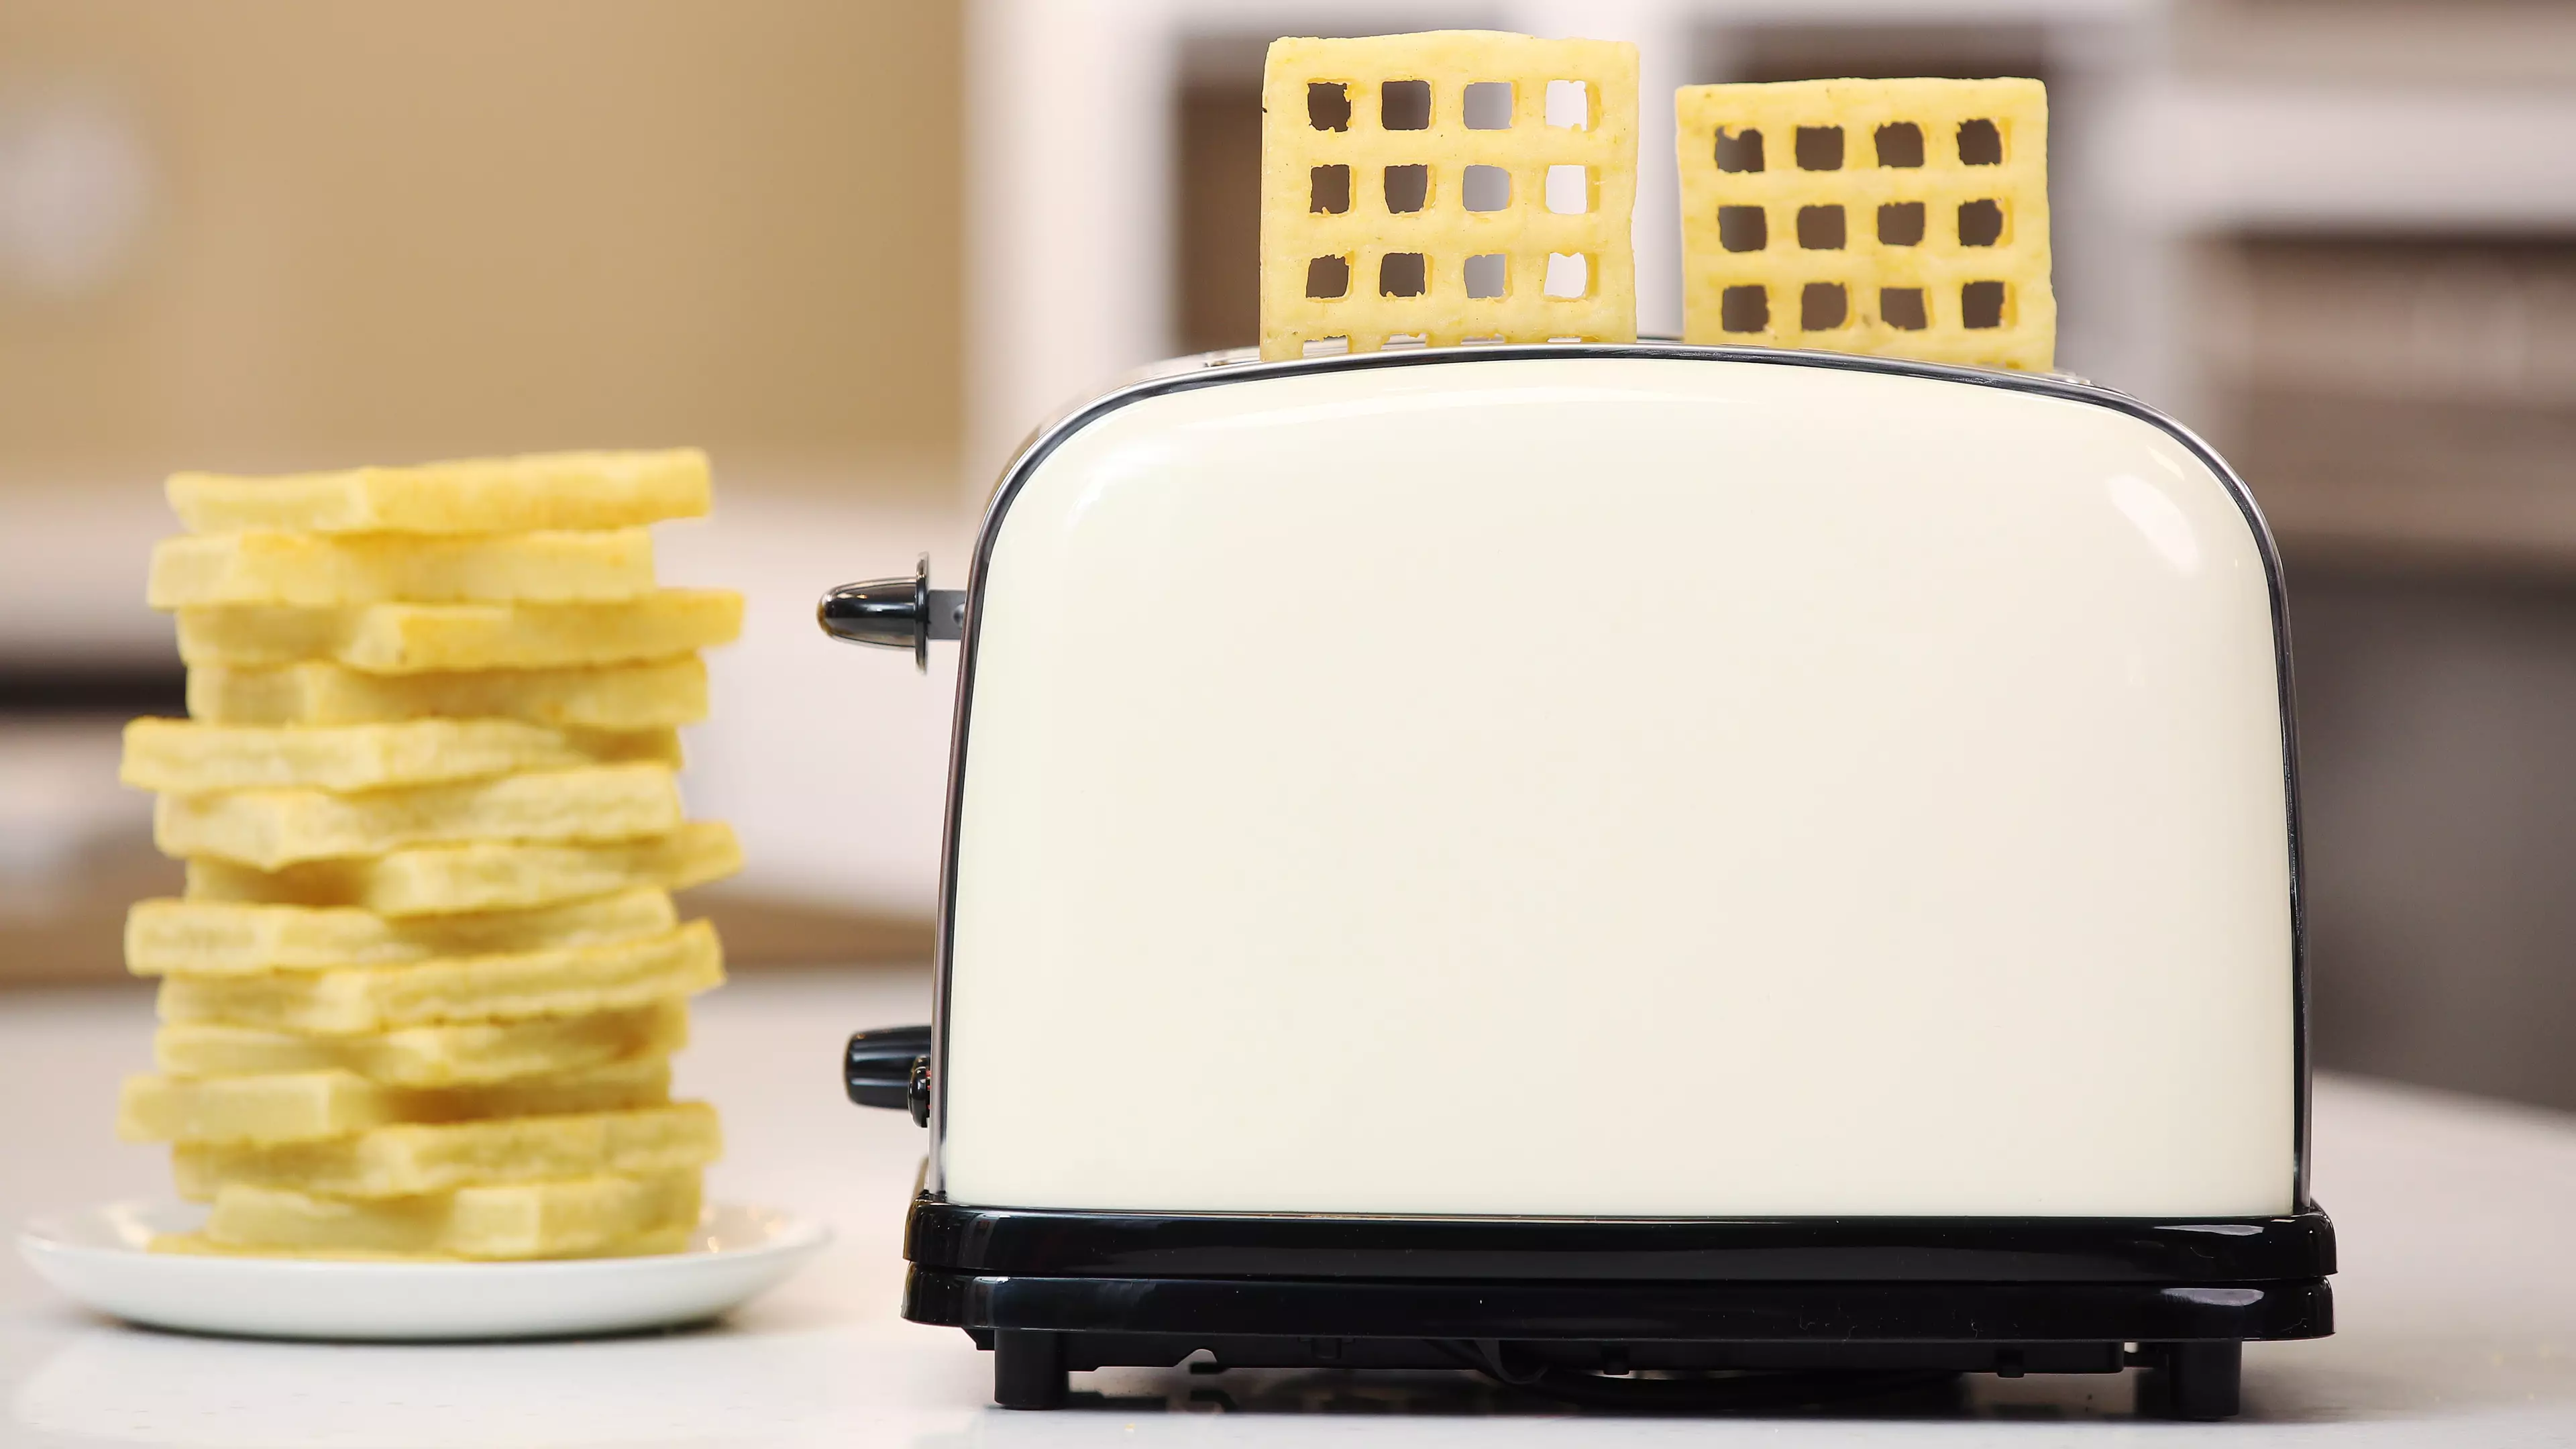 Birds Eye Confirms You Can Cook Waffles In The Toaster And We Are Shook